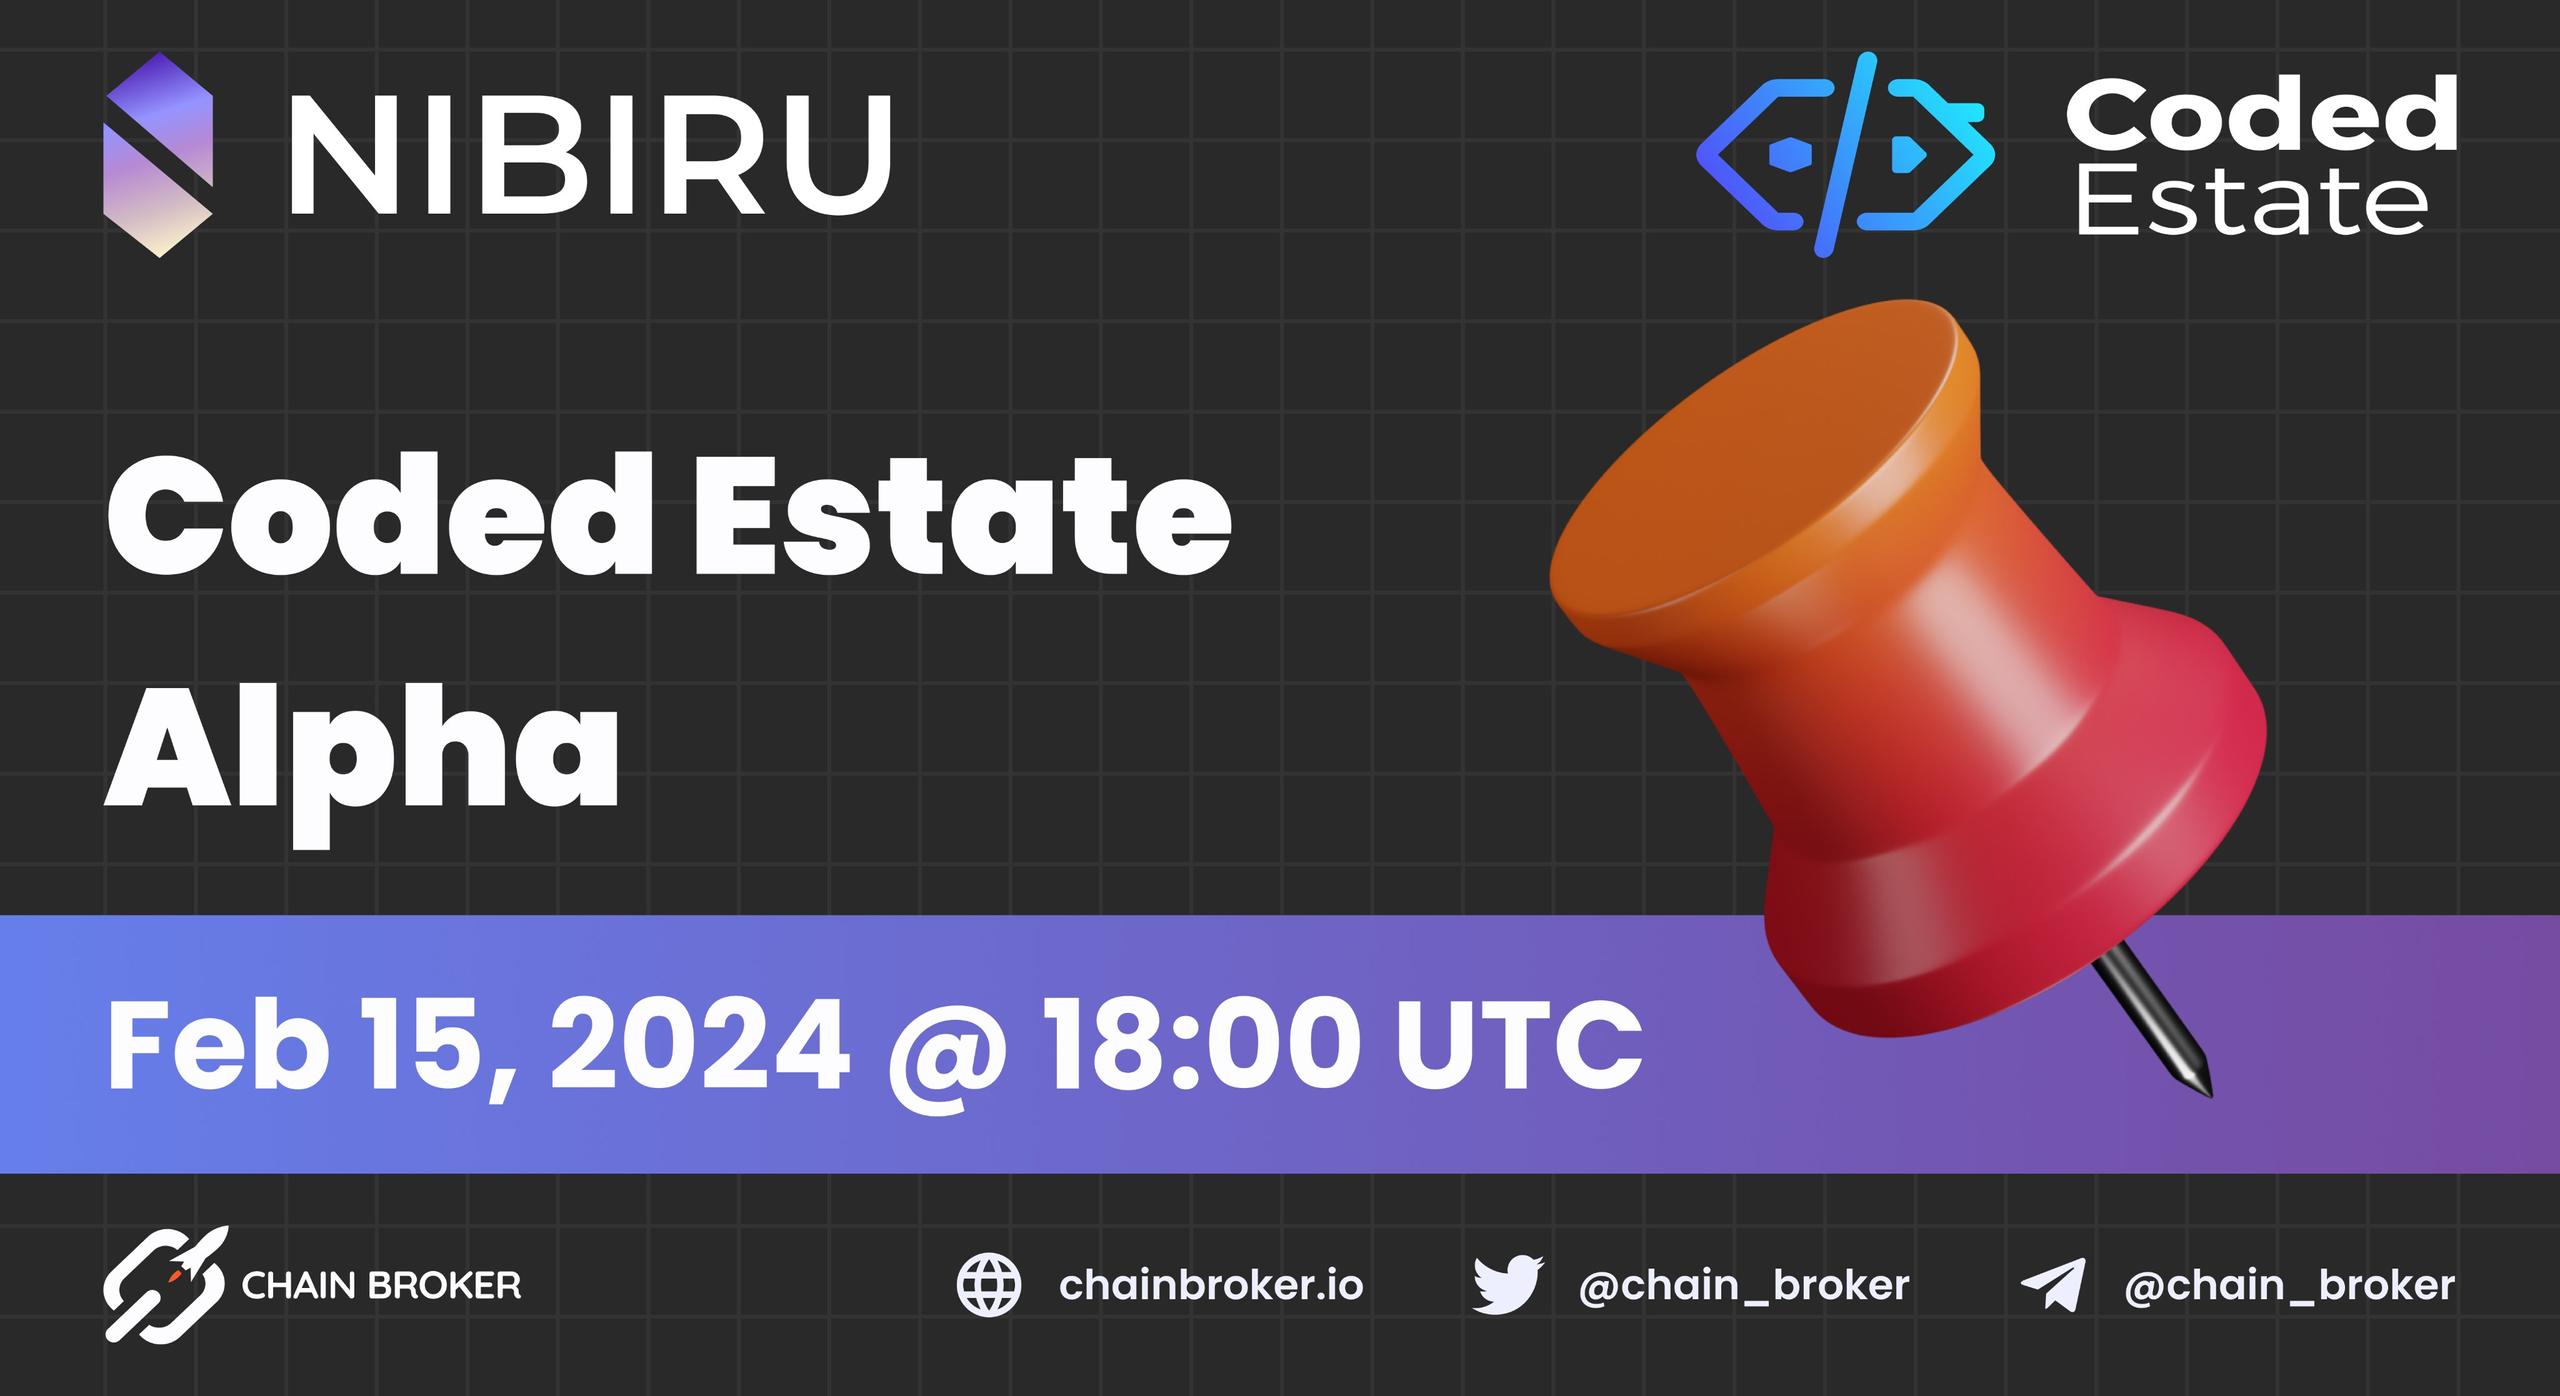 Coded Estate launches on Nibiru Chain